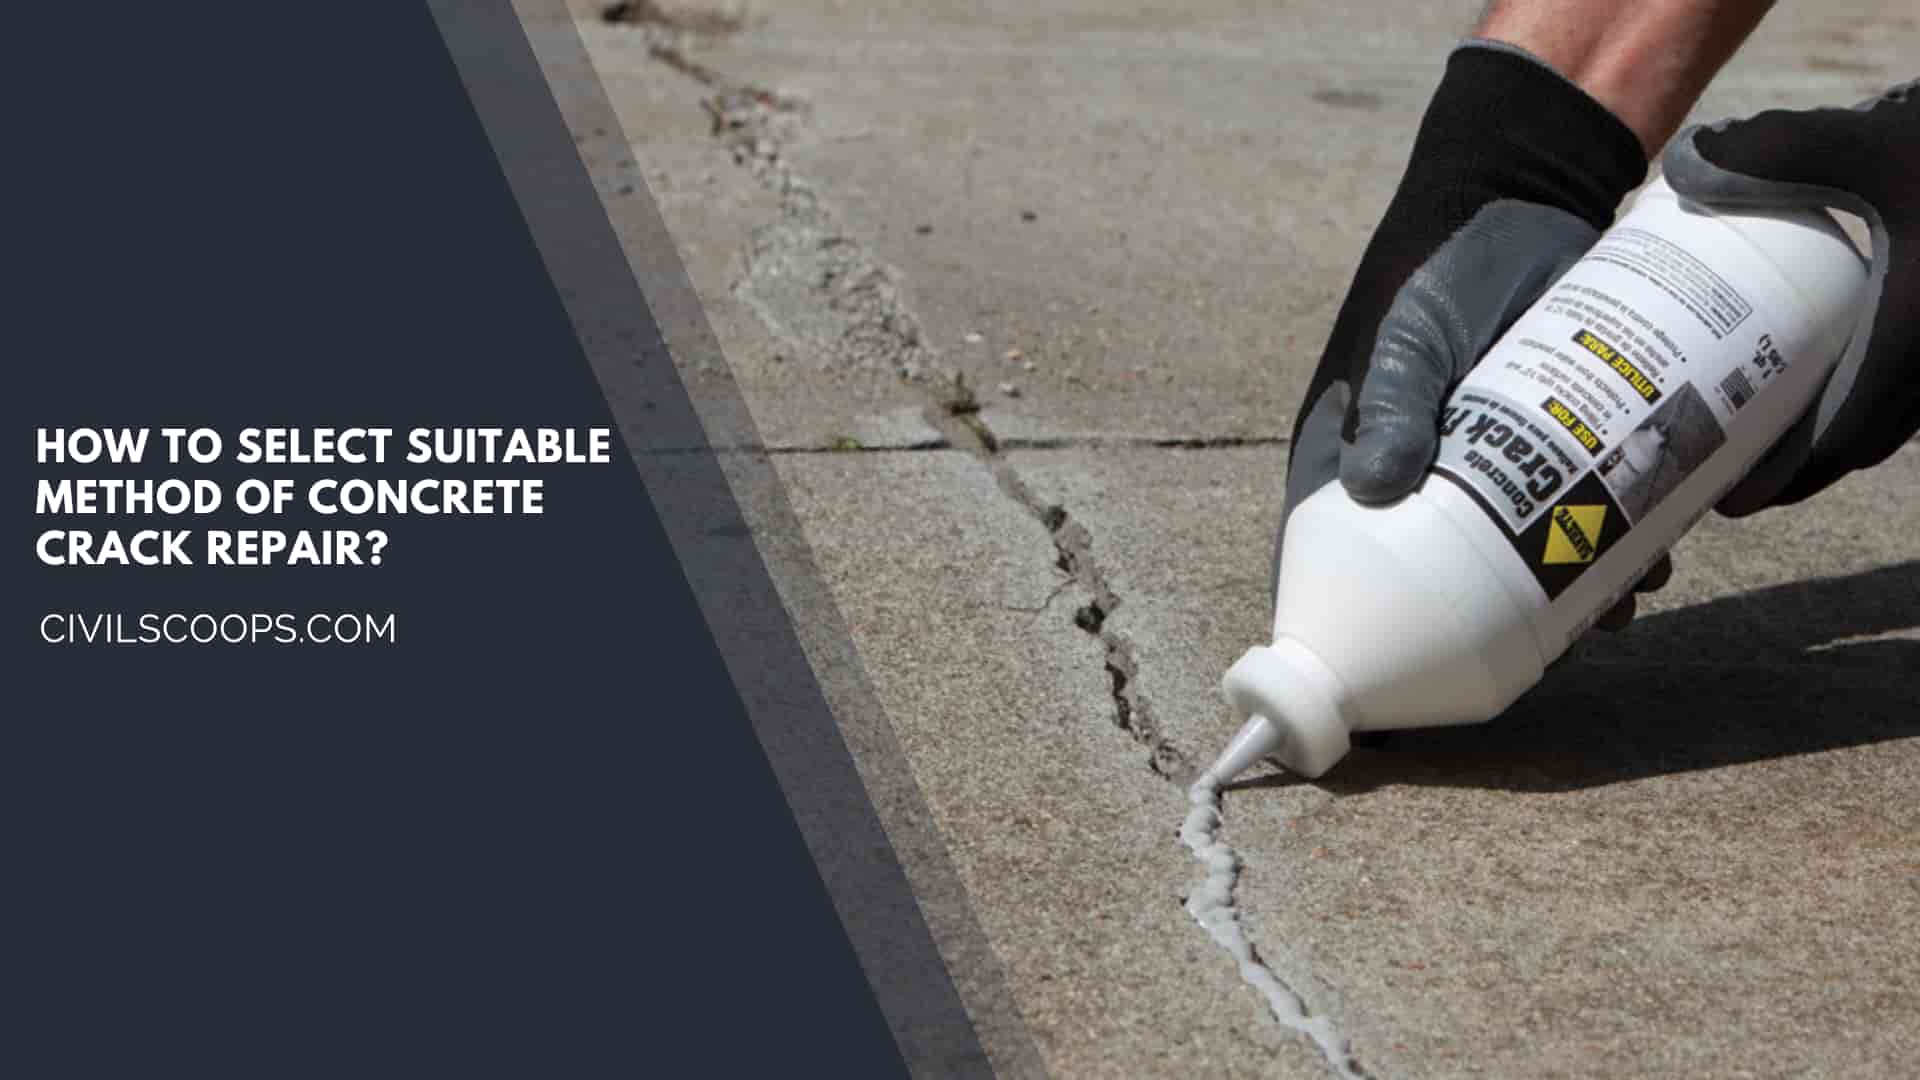 How to Select Suitable Method of Concrete Crack Repair